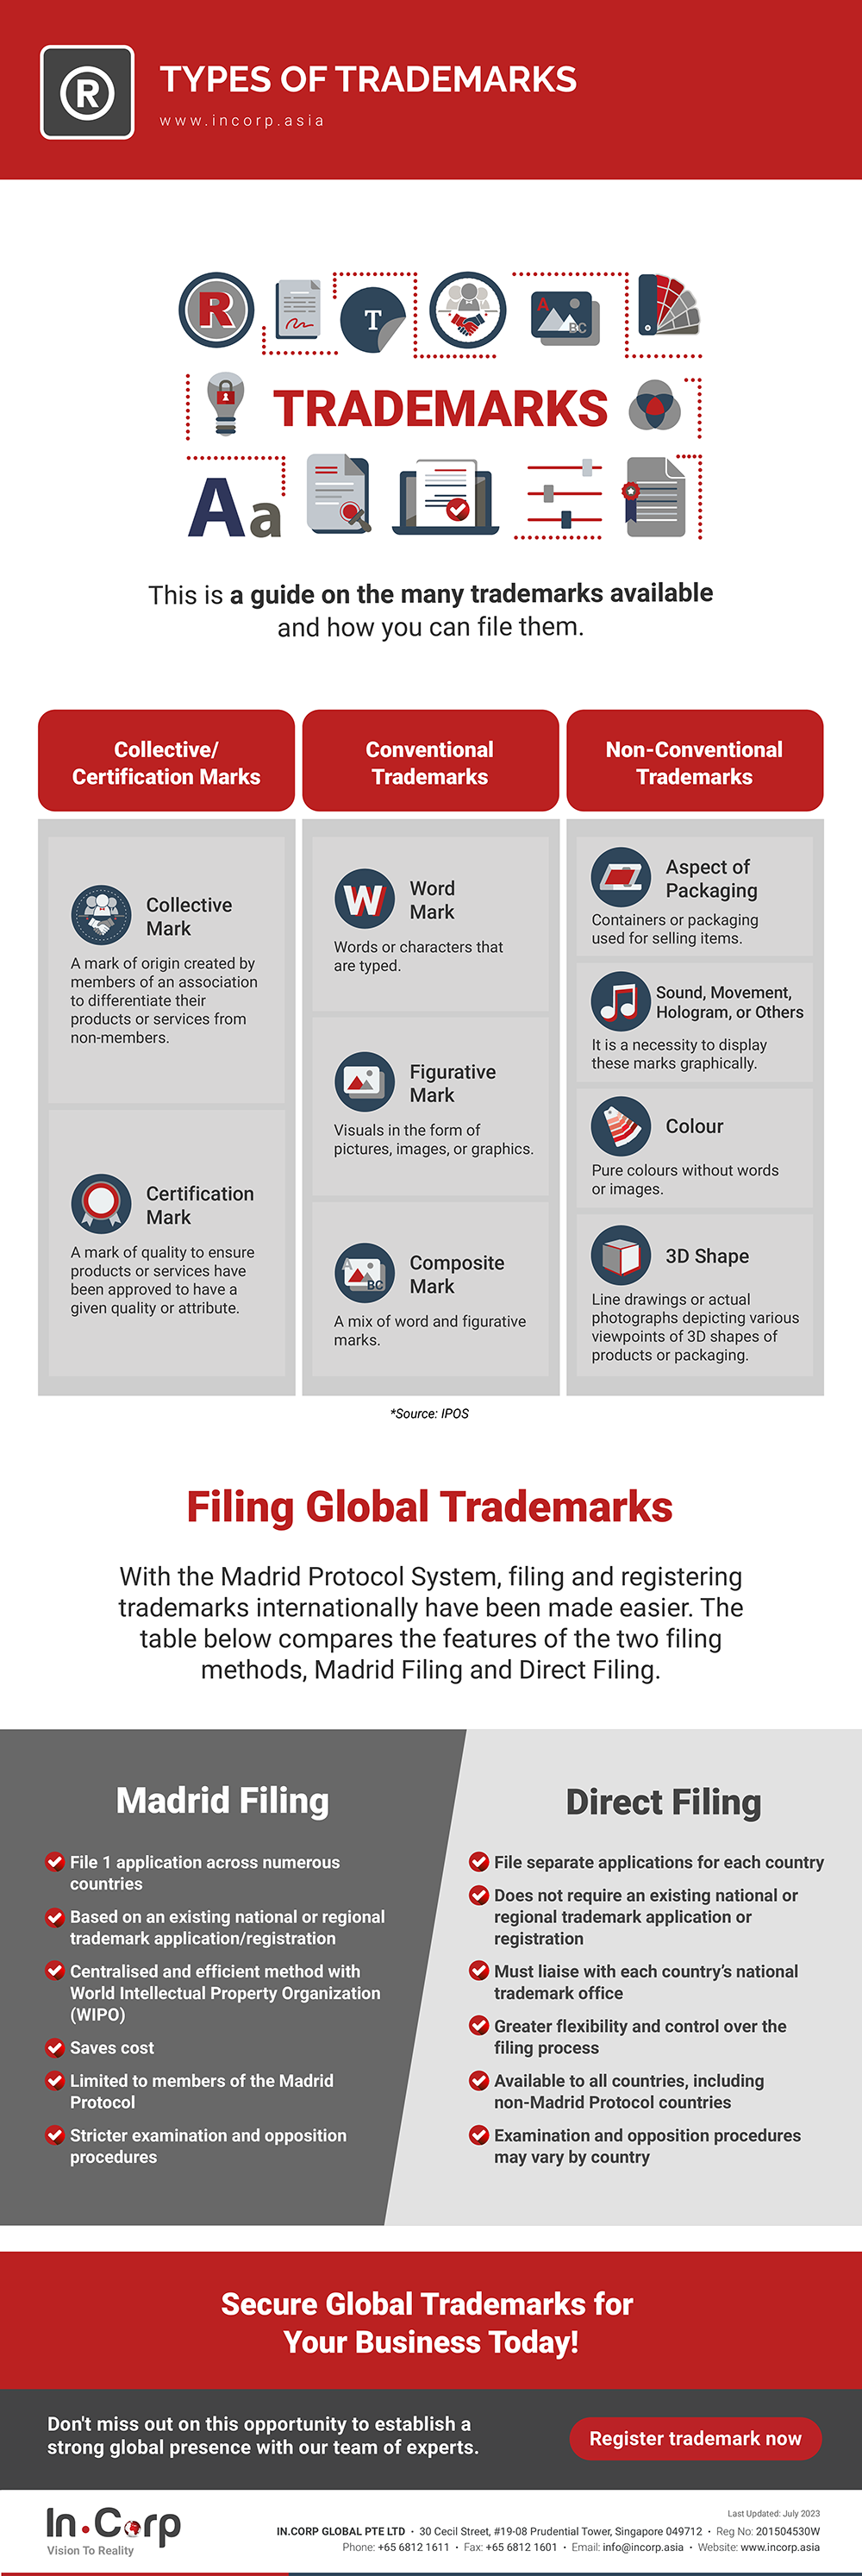 Trademark Registration: What Are the Types of Trademarks